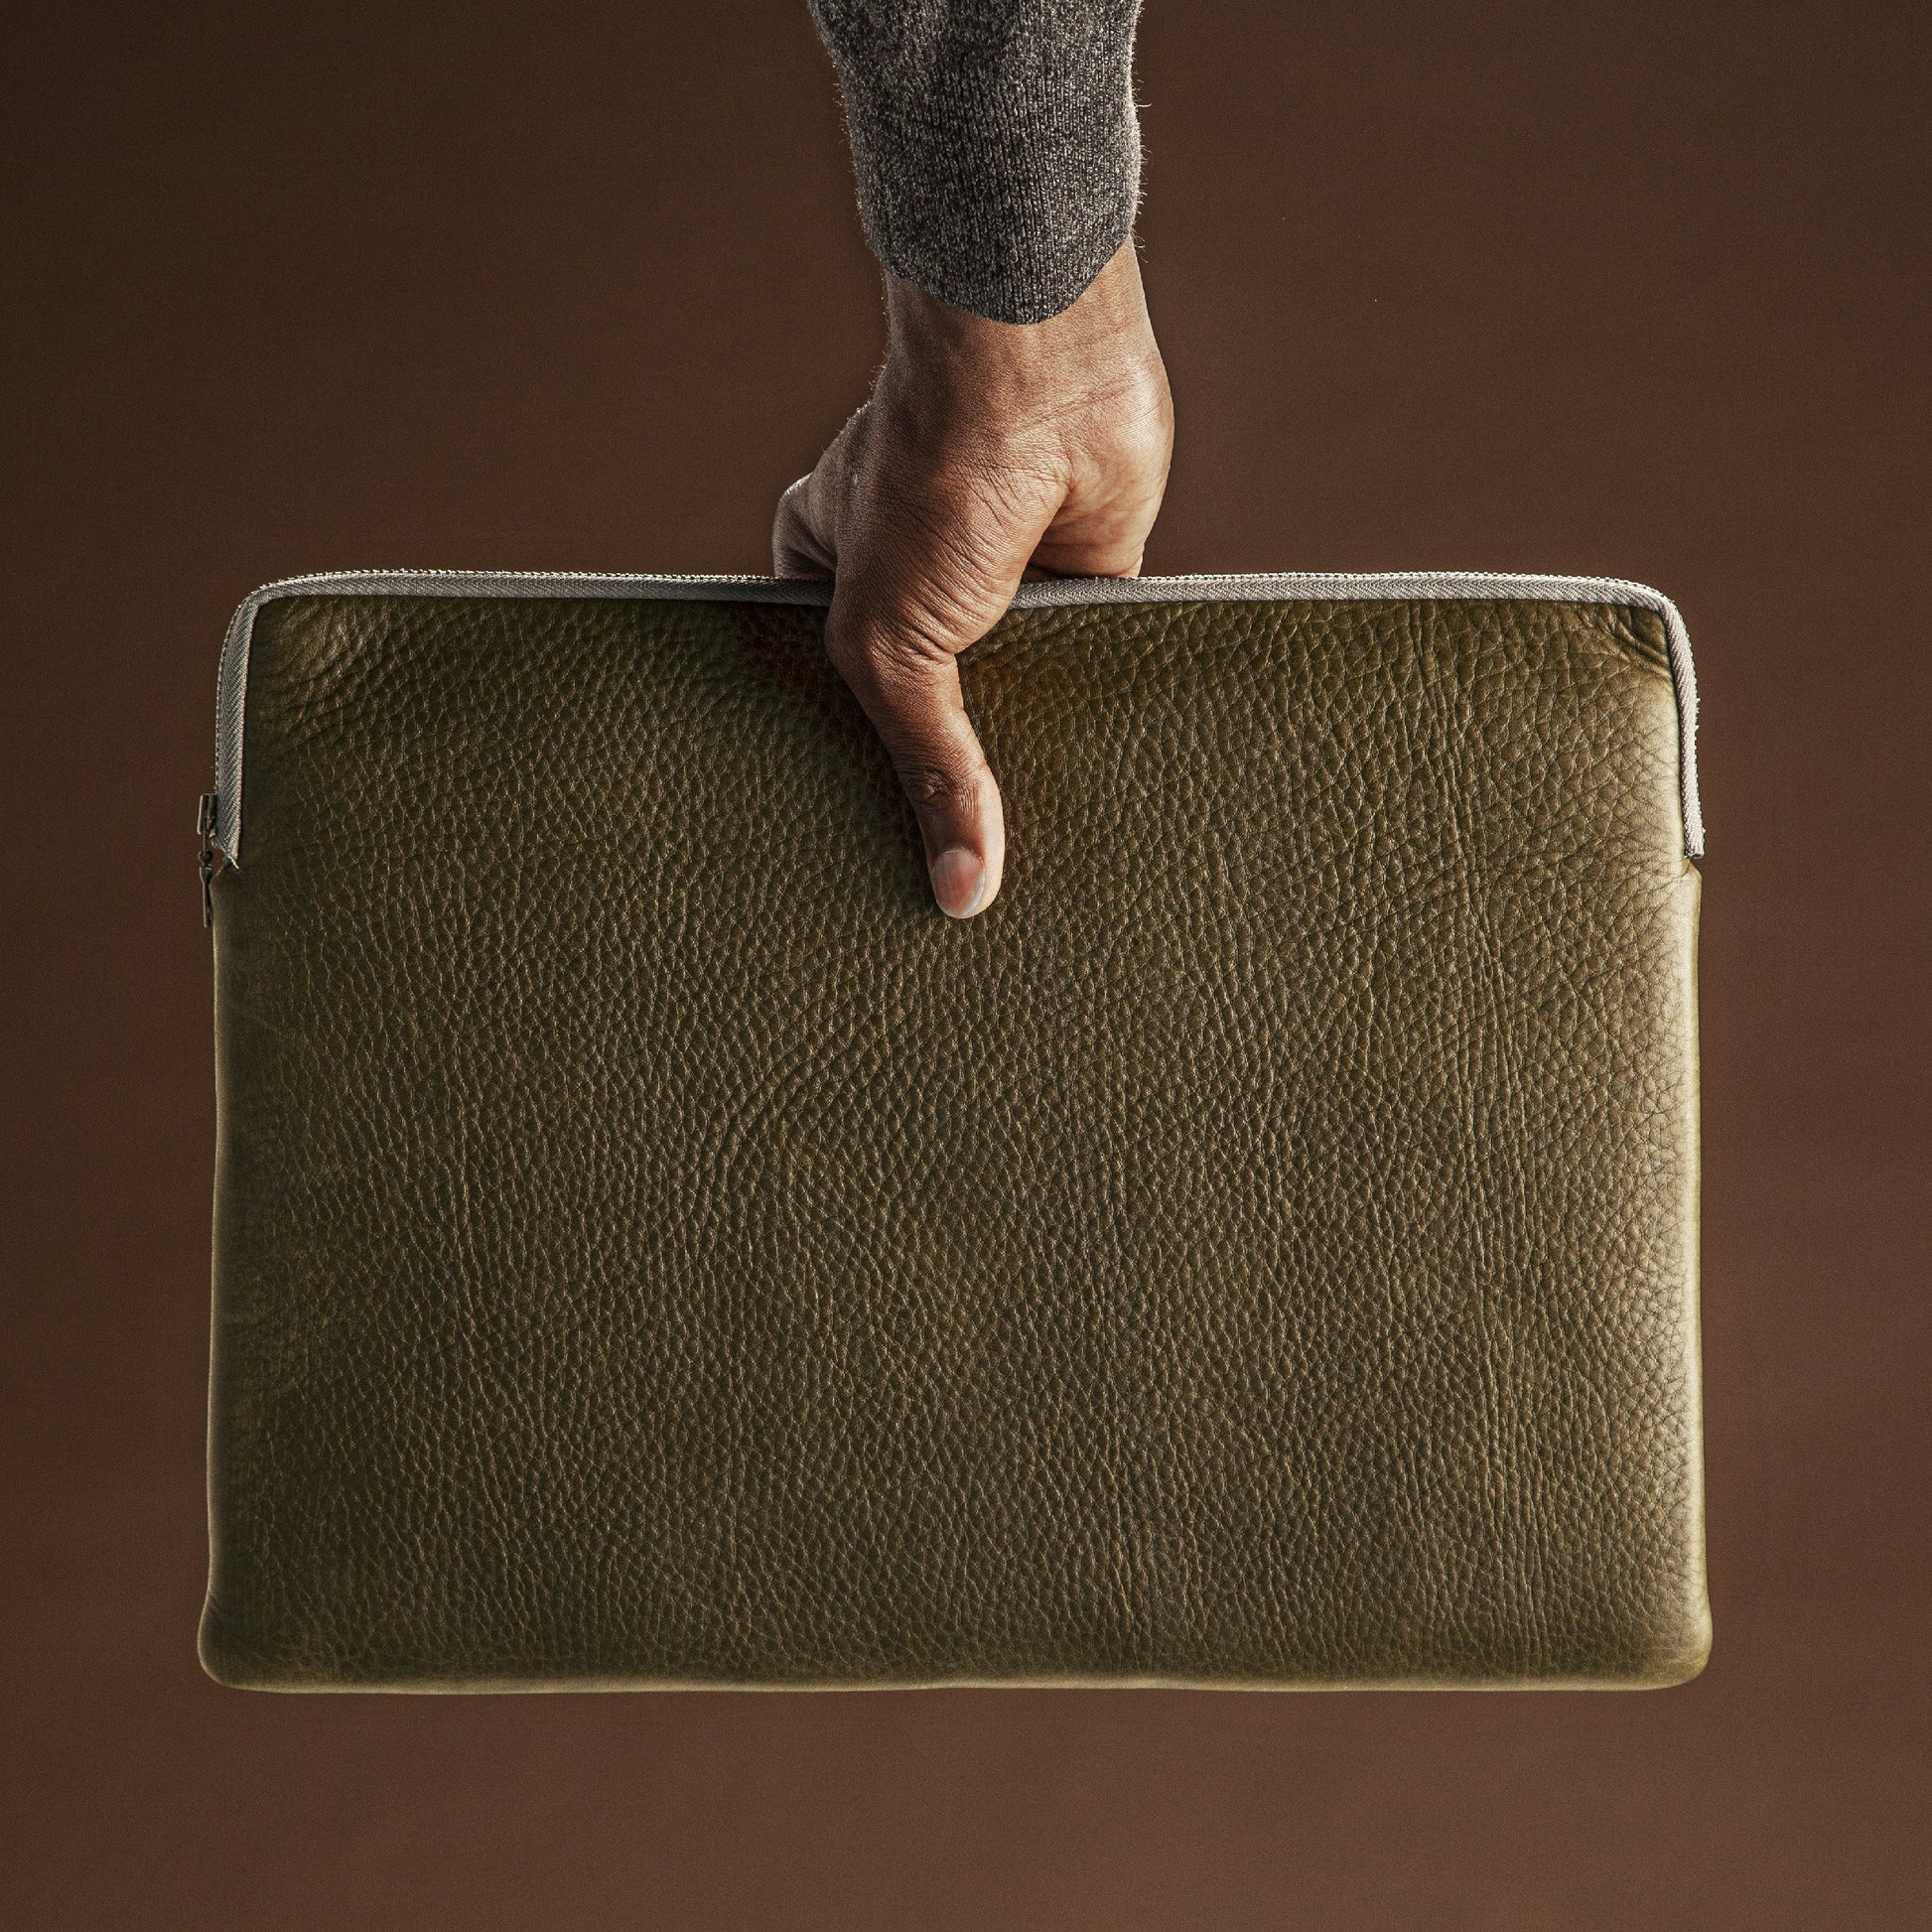 Ethically Crafted Sustainable Leather / Presidio Leather Laptop Sleeve / 13 / Dark Brown / Genuine Full Grain Leather / Parker Clay